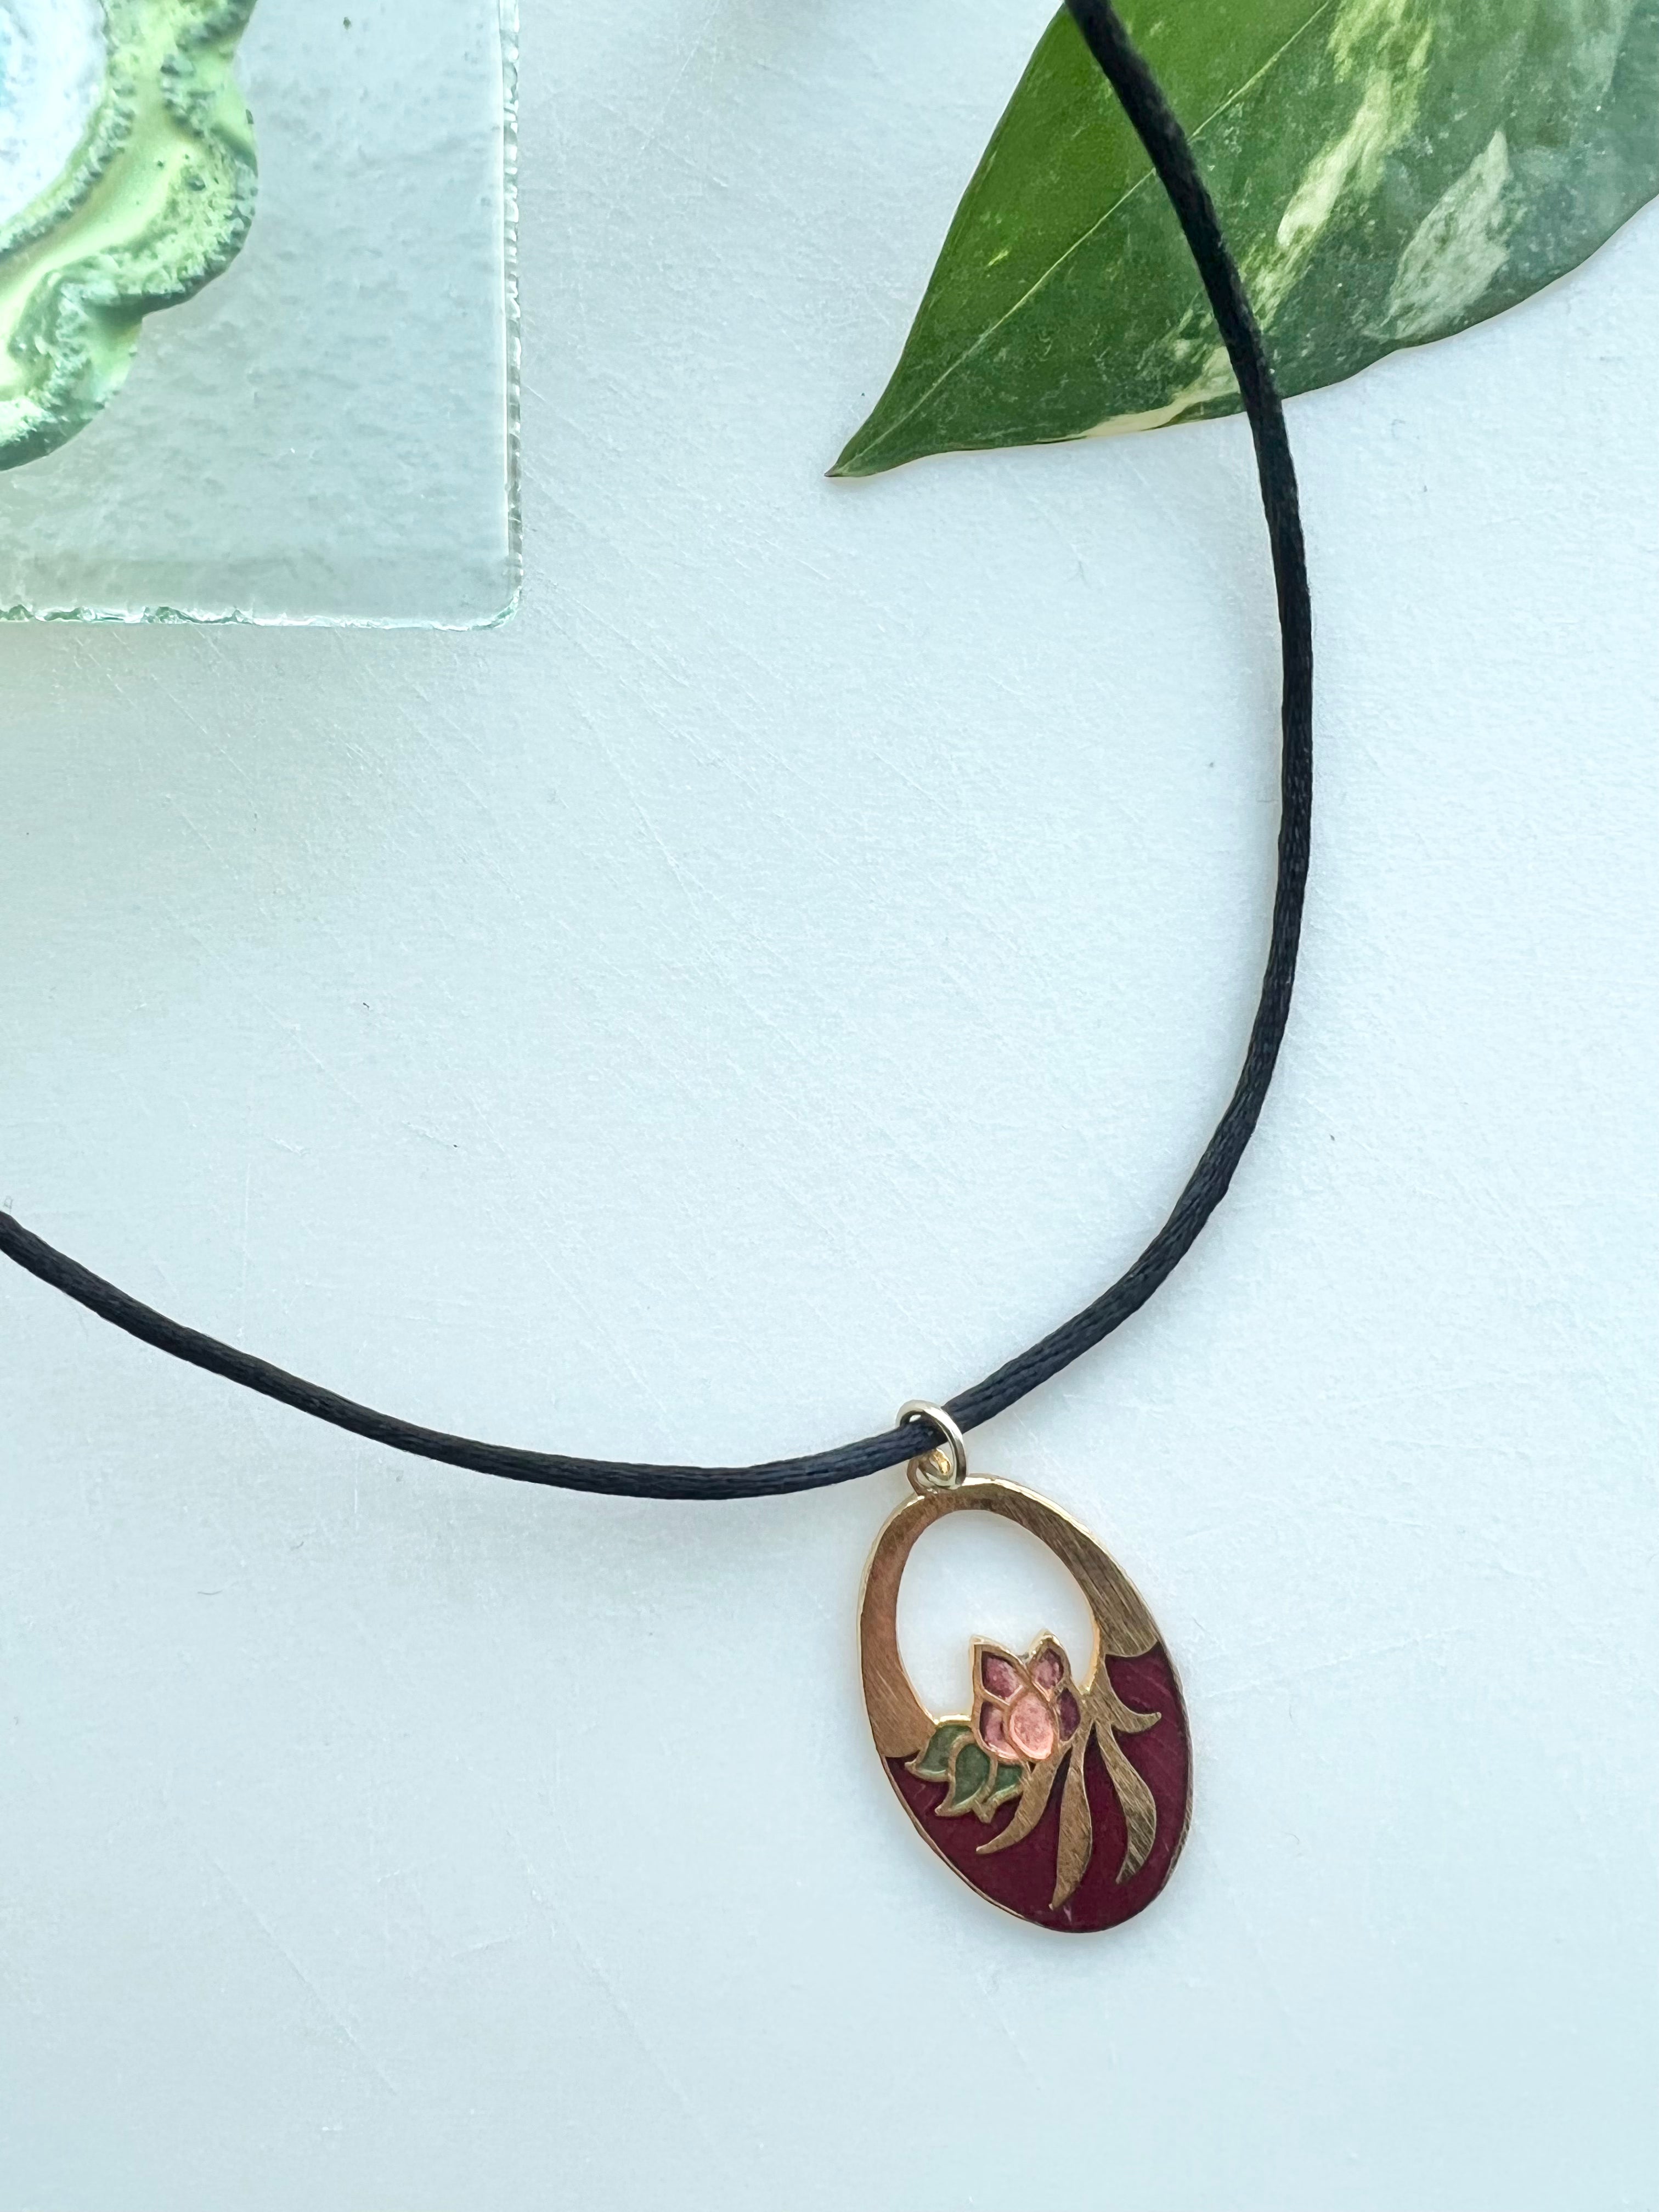 Ruby Oval Pendant Choker With Cutout Floral Design Strung On Satin Cord